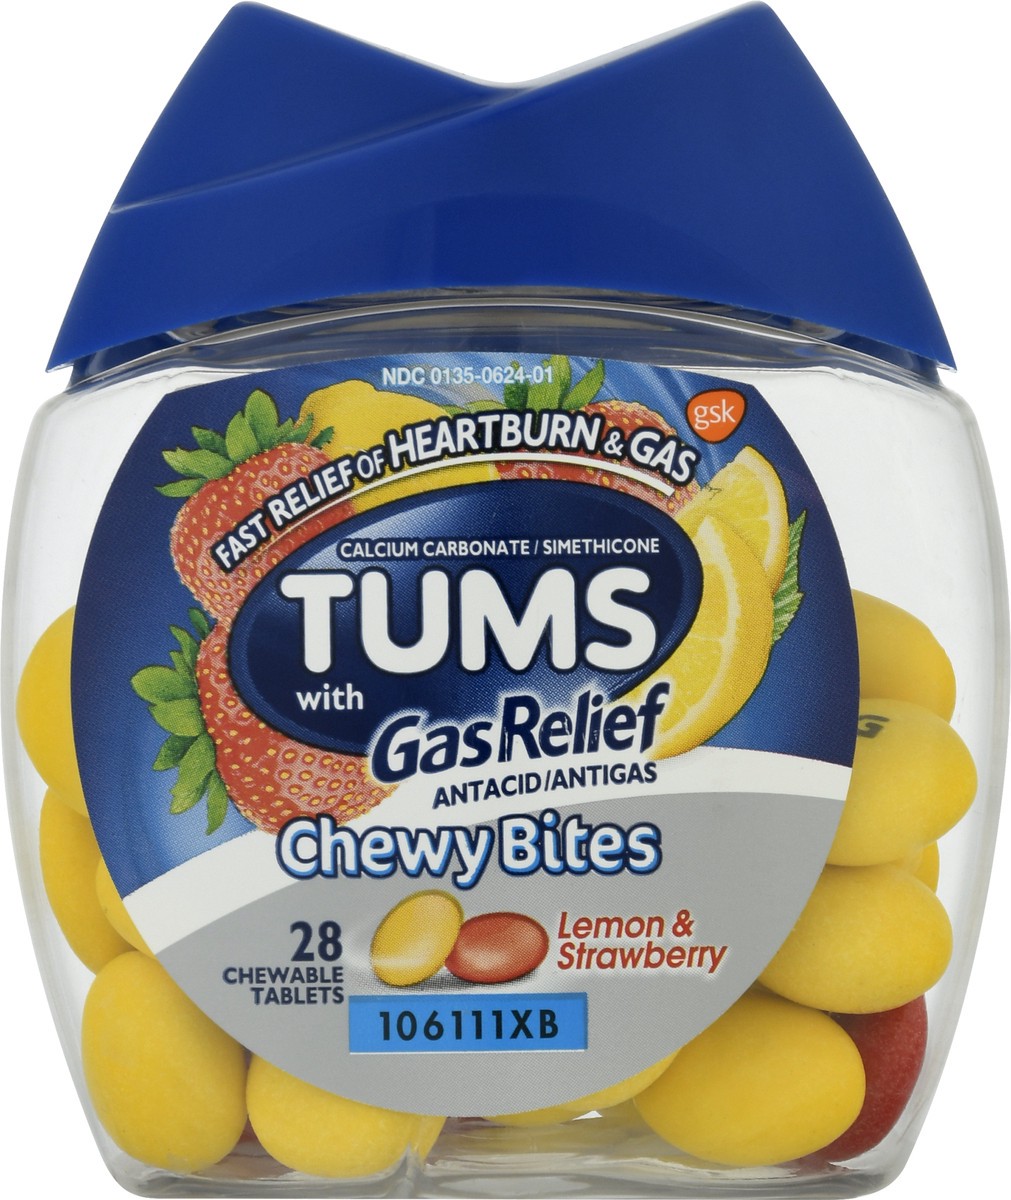 slide 6 of 9, Tums Chewable Tablets Lemon & Strawberry Gas Relief 28.0 ea, 28 ct